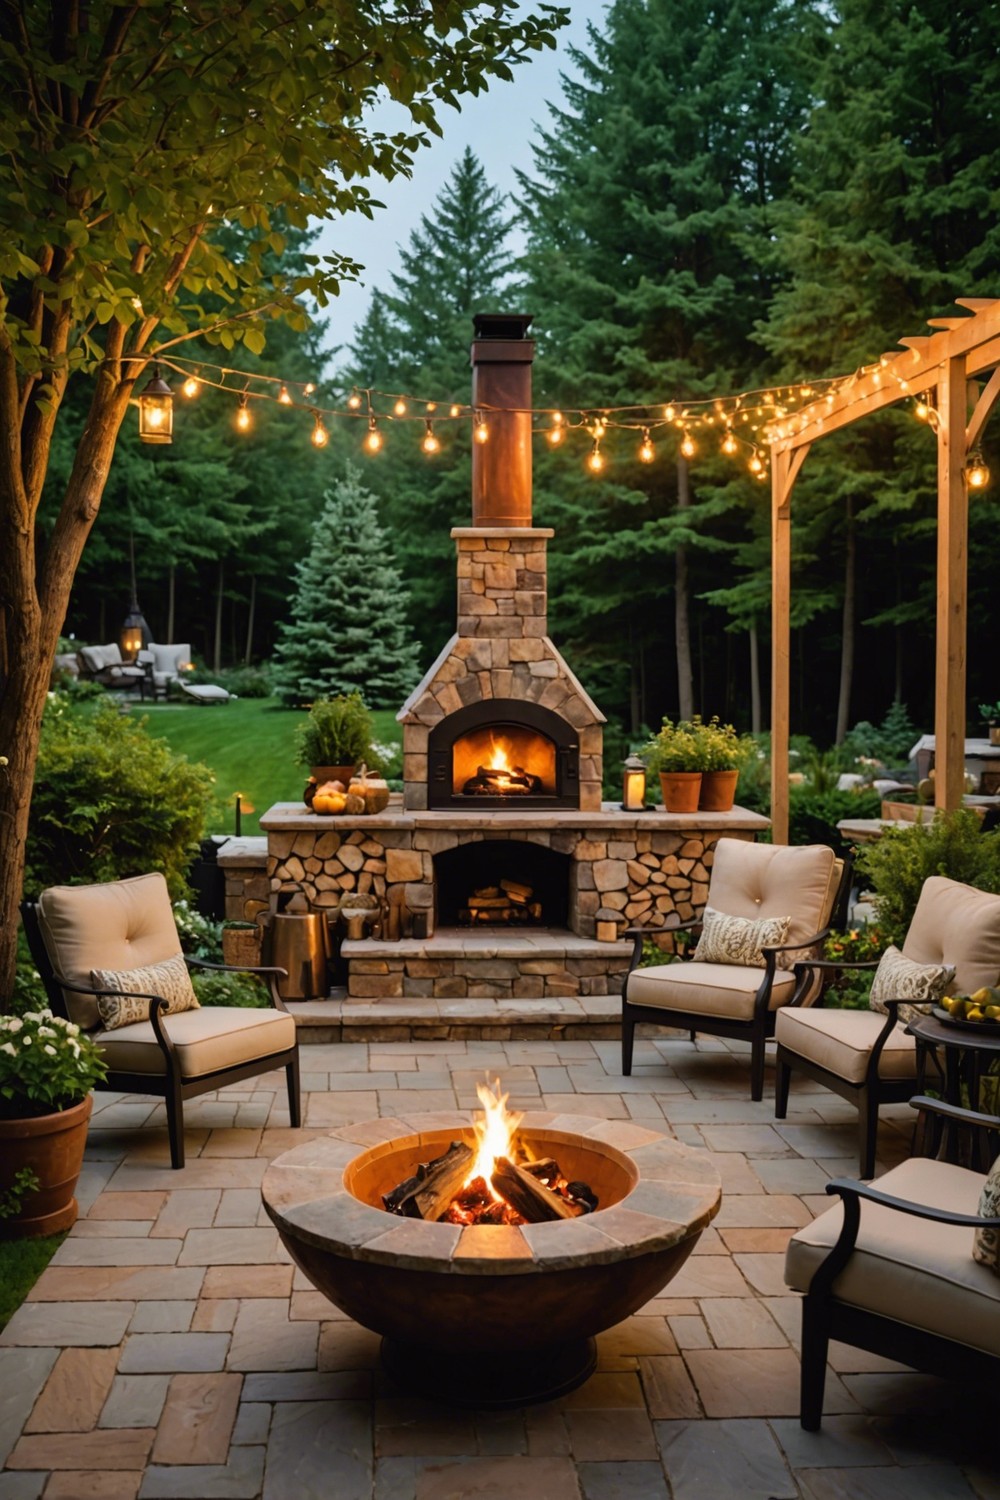 Outdoor Fireplace with Copper Chiminea